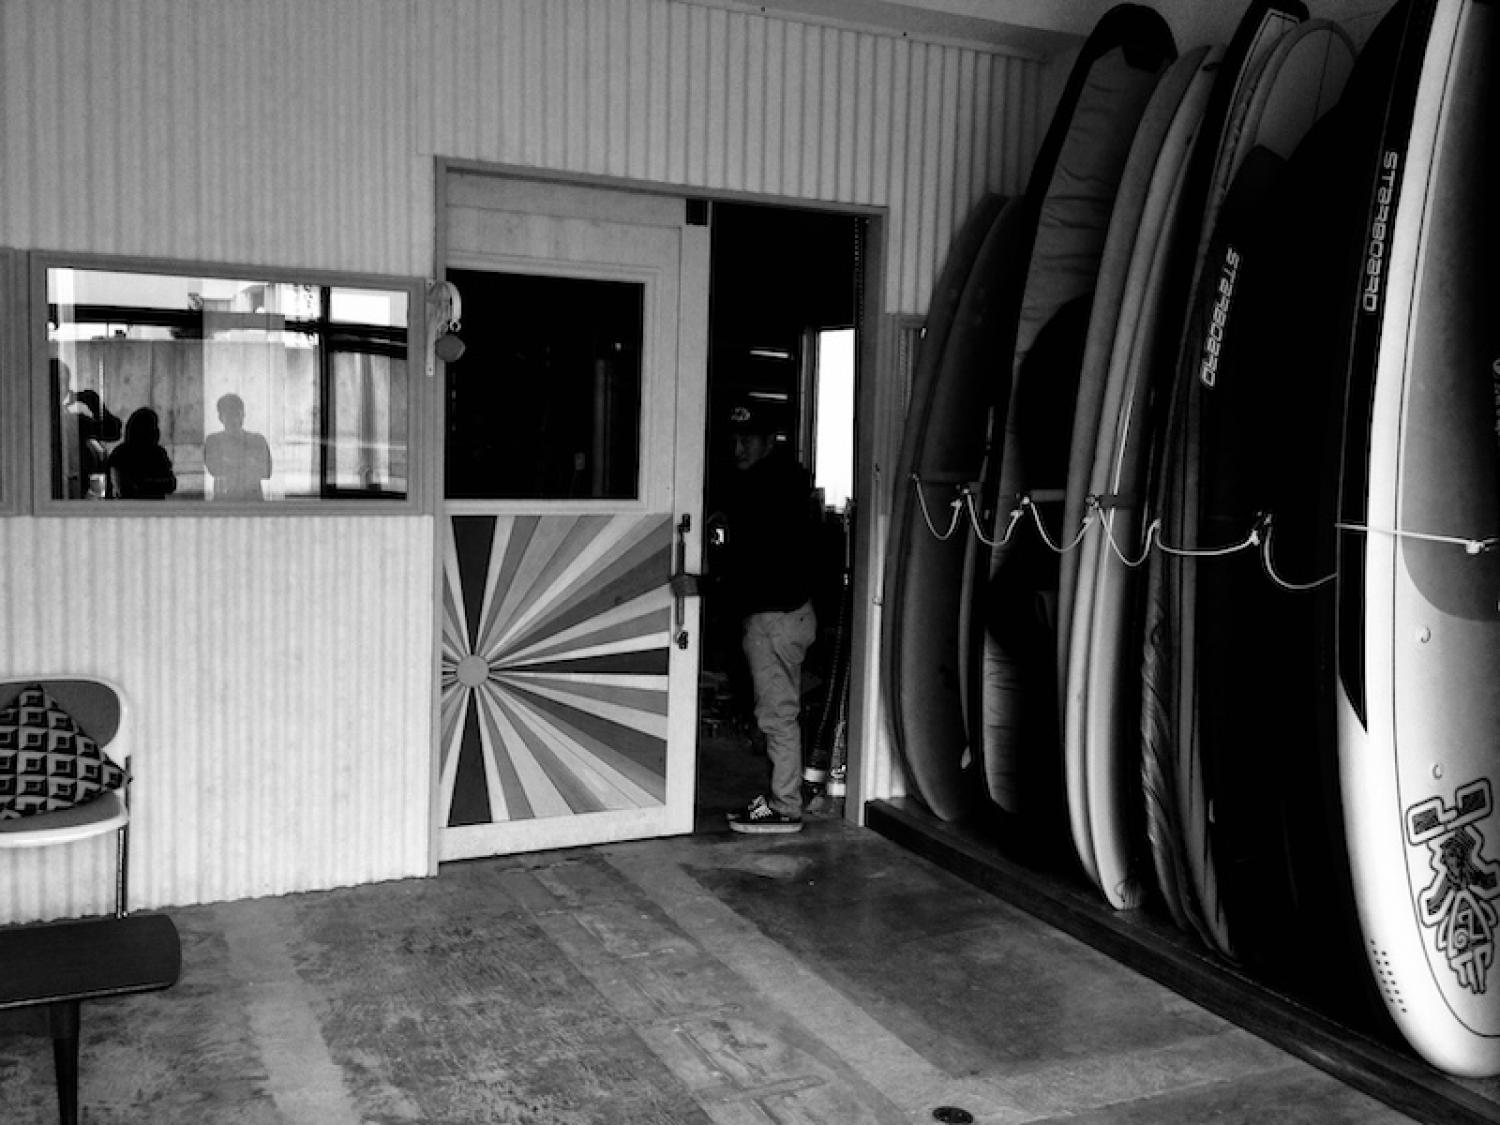 The Strage The Starge Room For your Surfboards Stand up paddle Boards and Gears